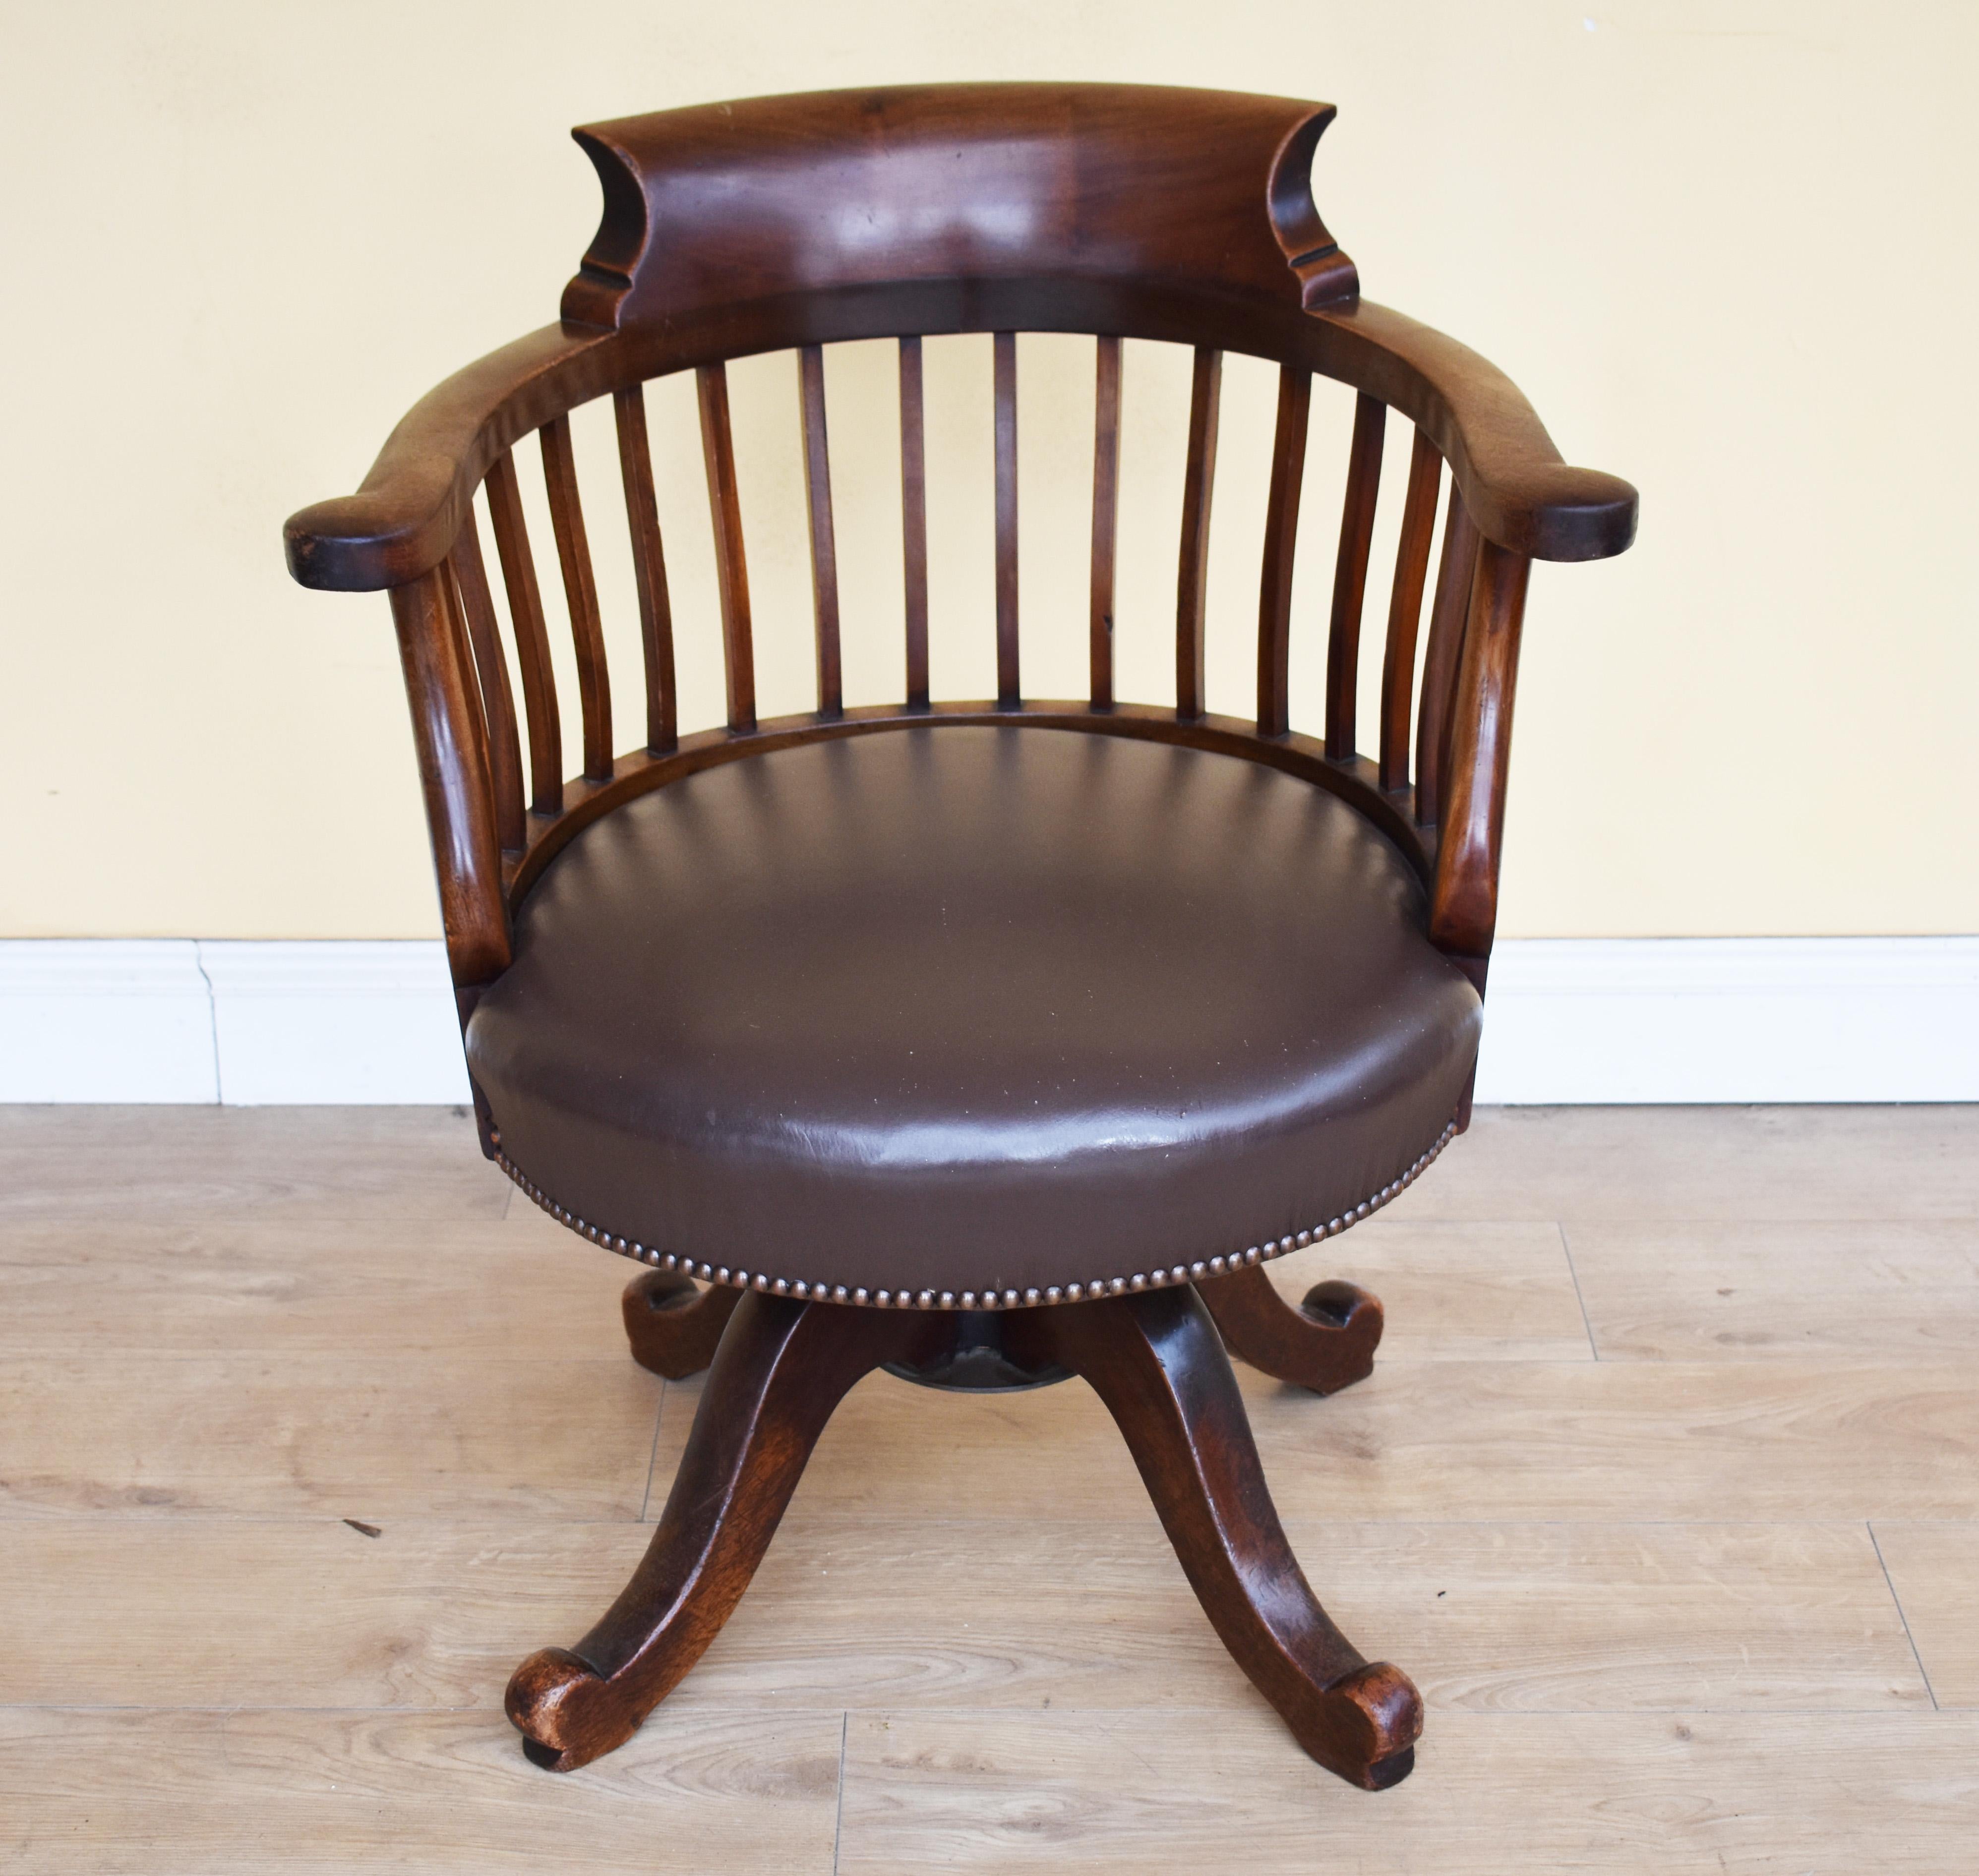 For sale is a Victorian mahogany s`wivel desk chair, having a leather seat, raised on shaped legs. The chair is in very good, original condition. 

Measures: Width 26